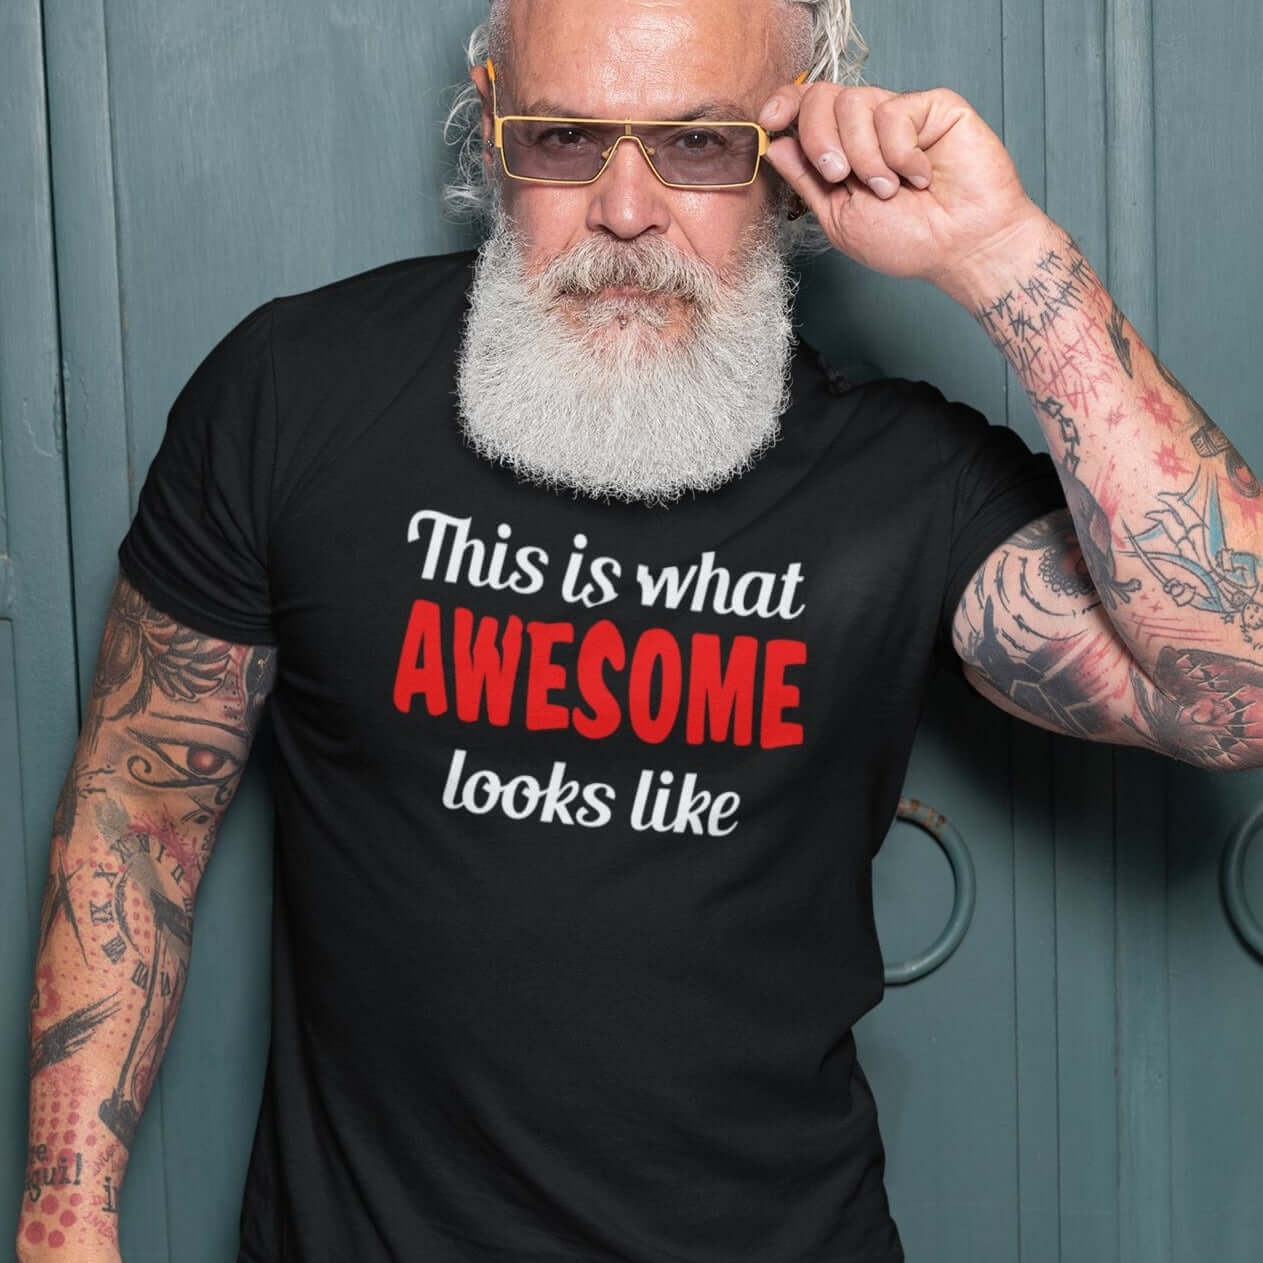 Tattooed bearded man wearing black t-shirt with the words This is what awesome looks like printed on the front. The word awesome is bright red. The rest of the text is white.